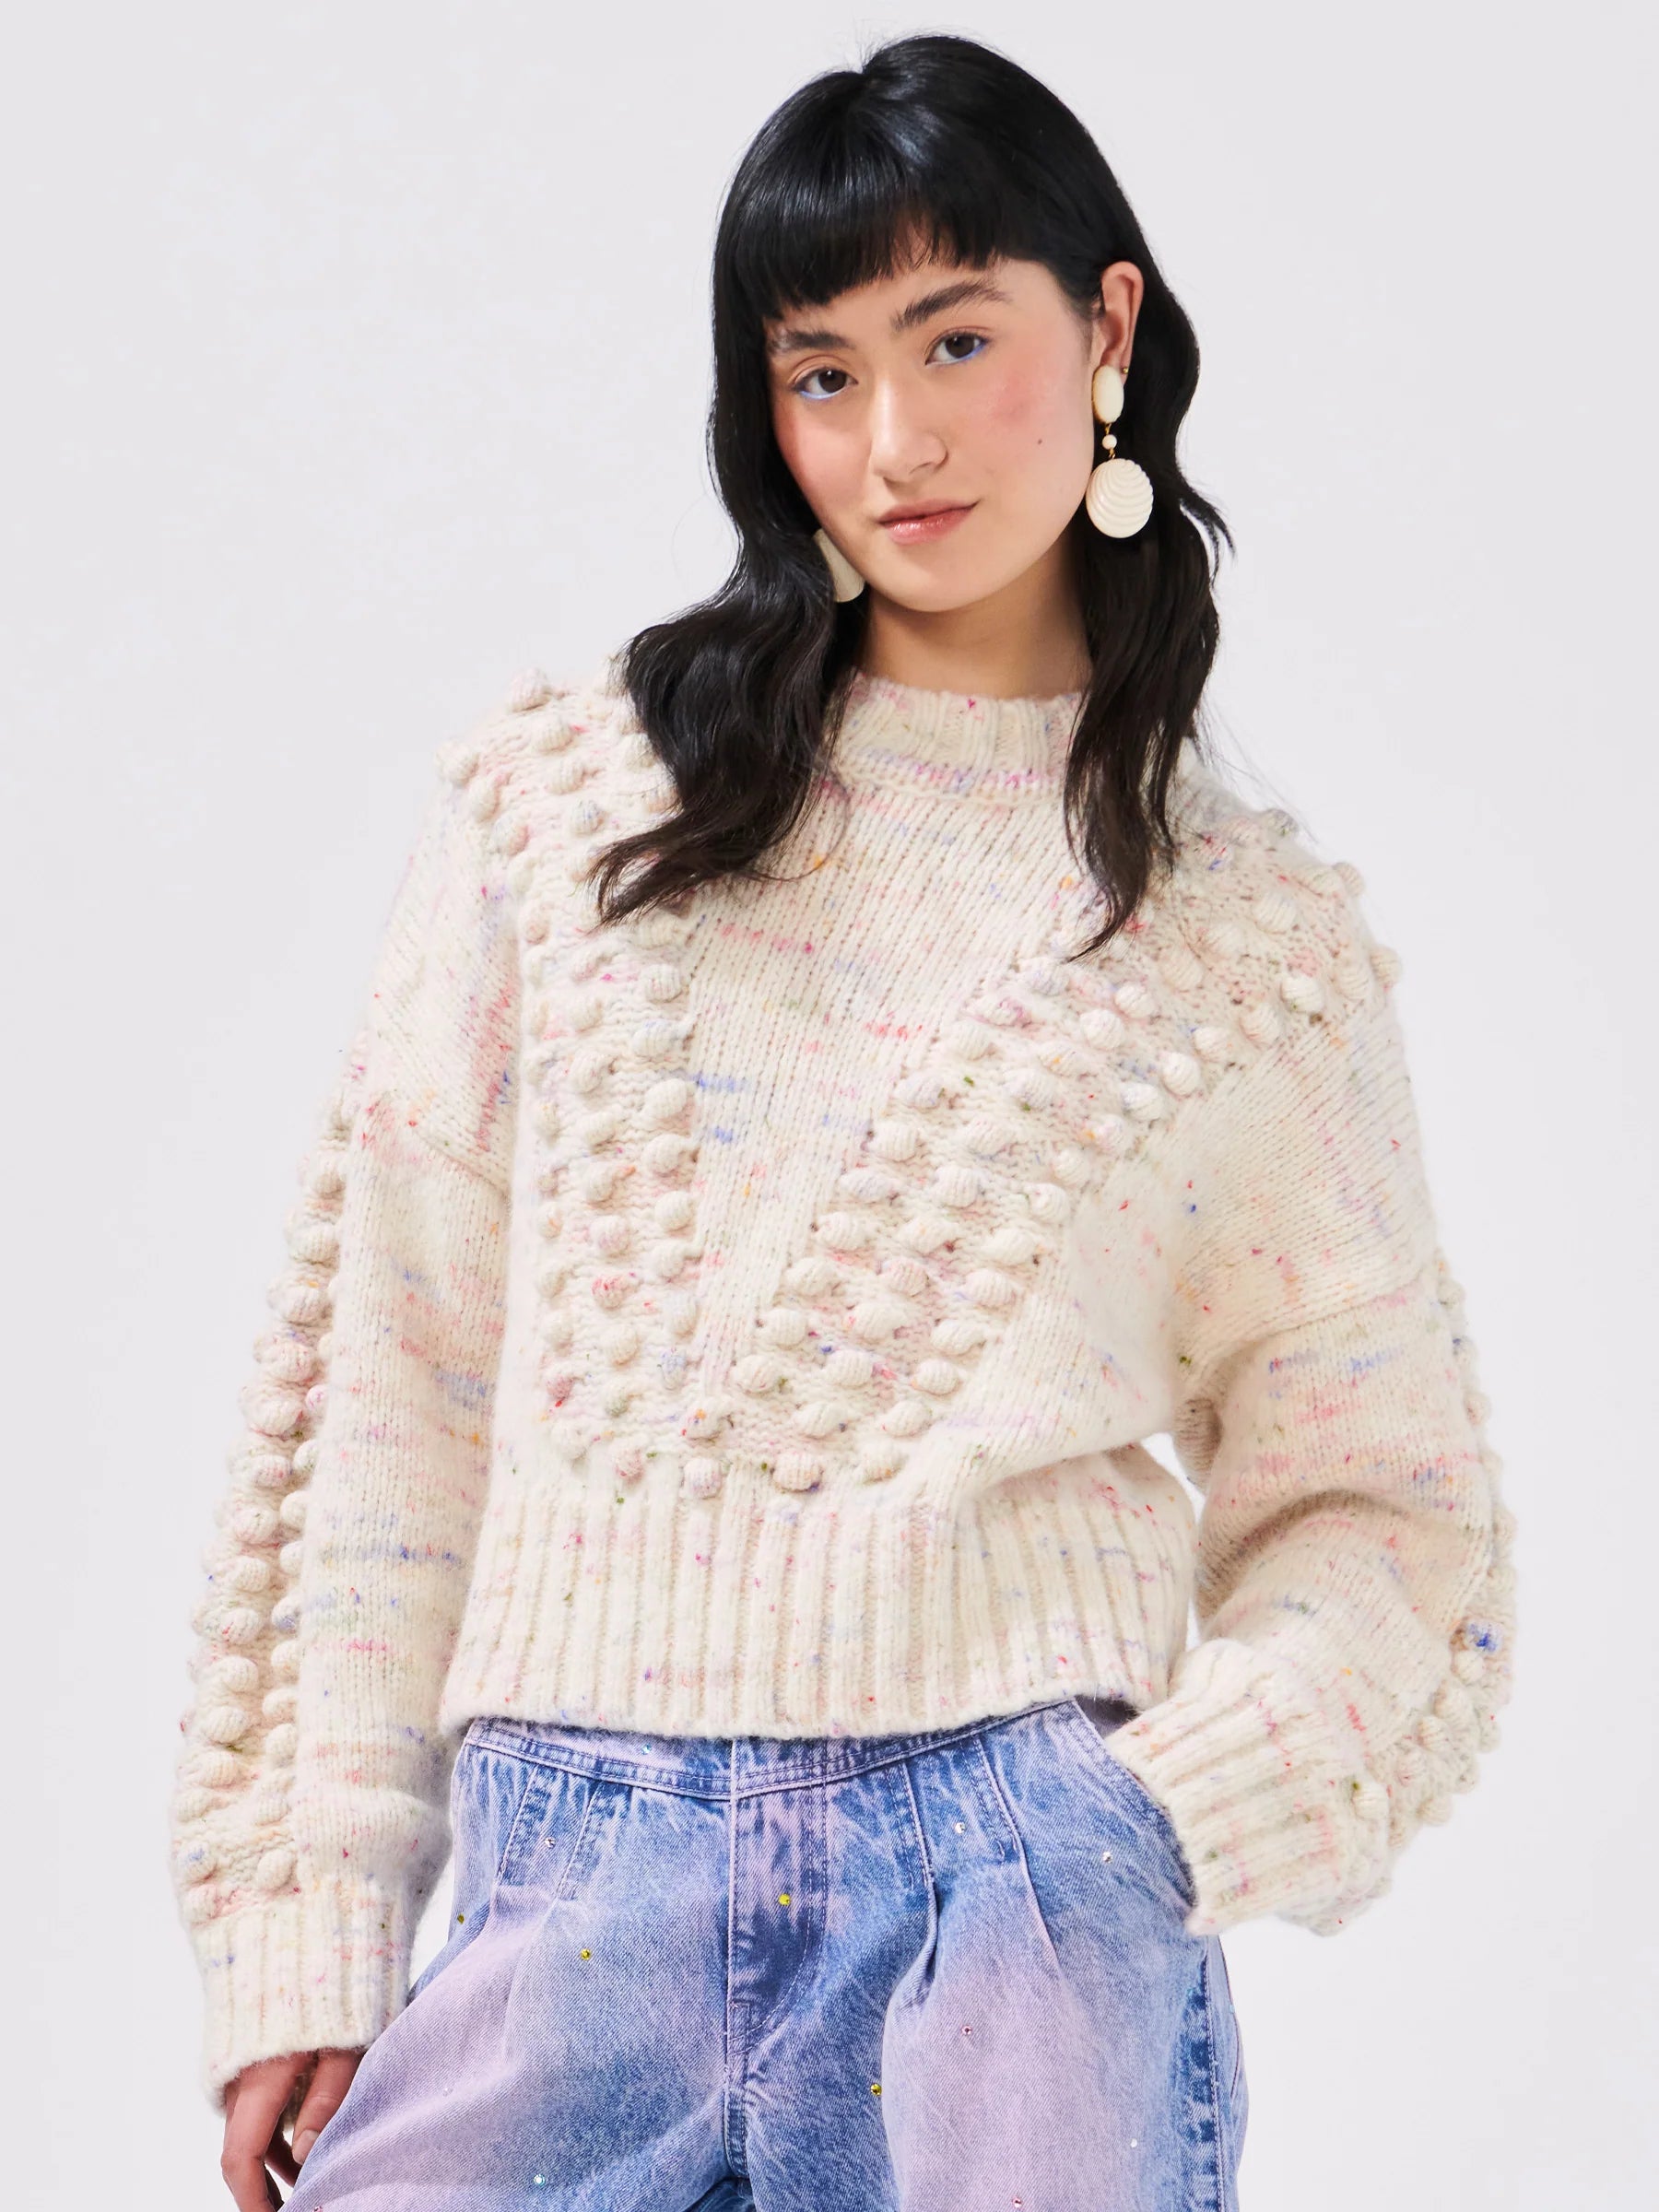 Hayley Menzies Fluffy Clouds Jumper, sweater, oversized sweater, crewneck sweater, women's clothing